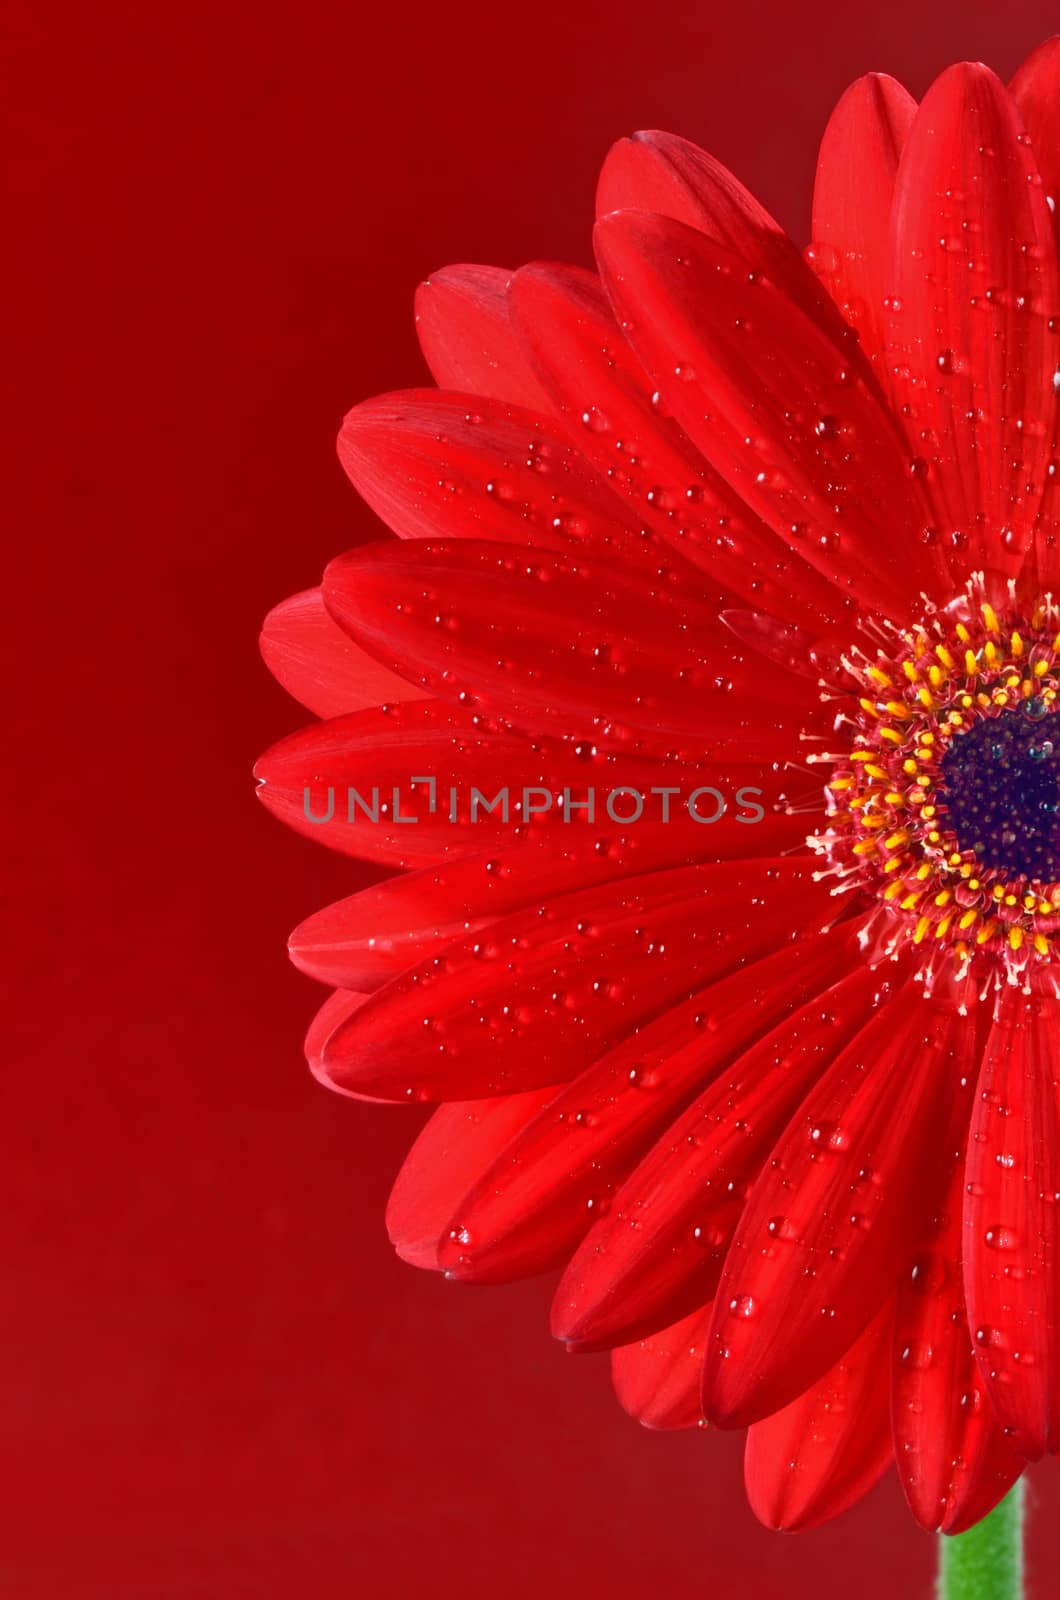 Red Gerbera Flower on red background